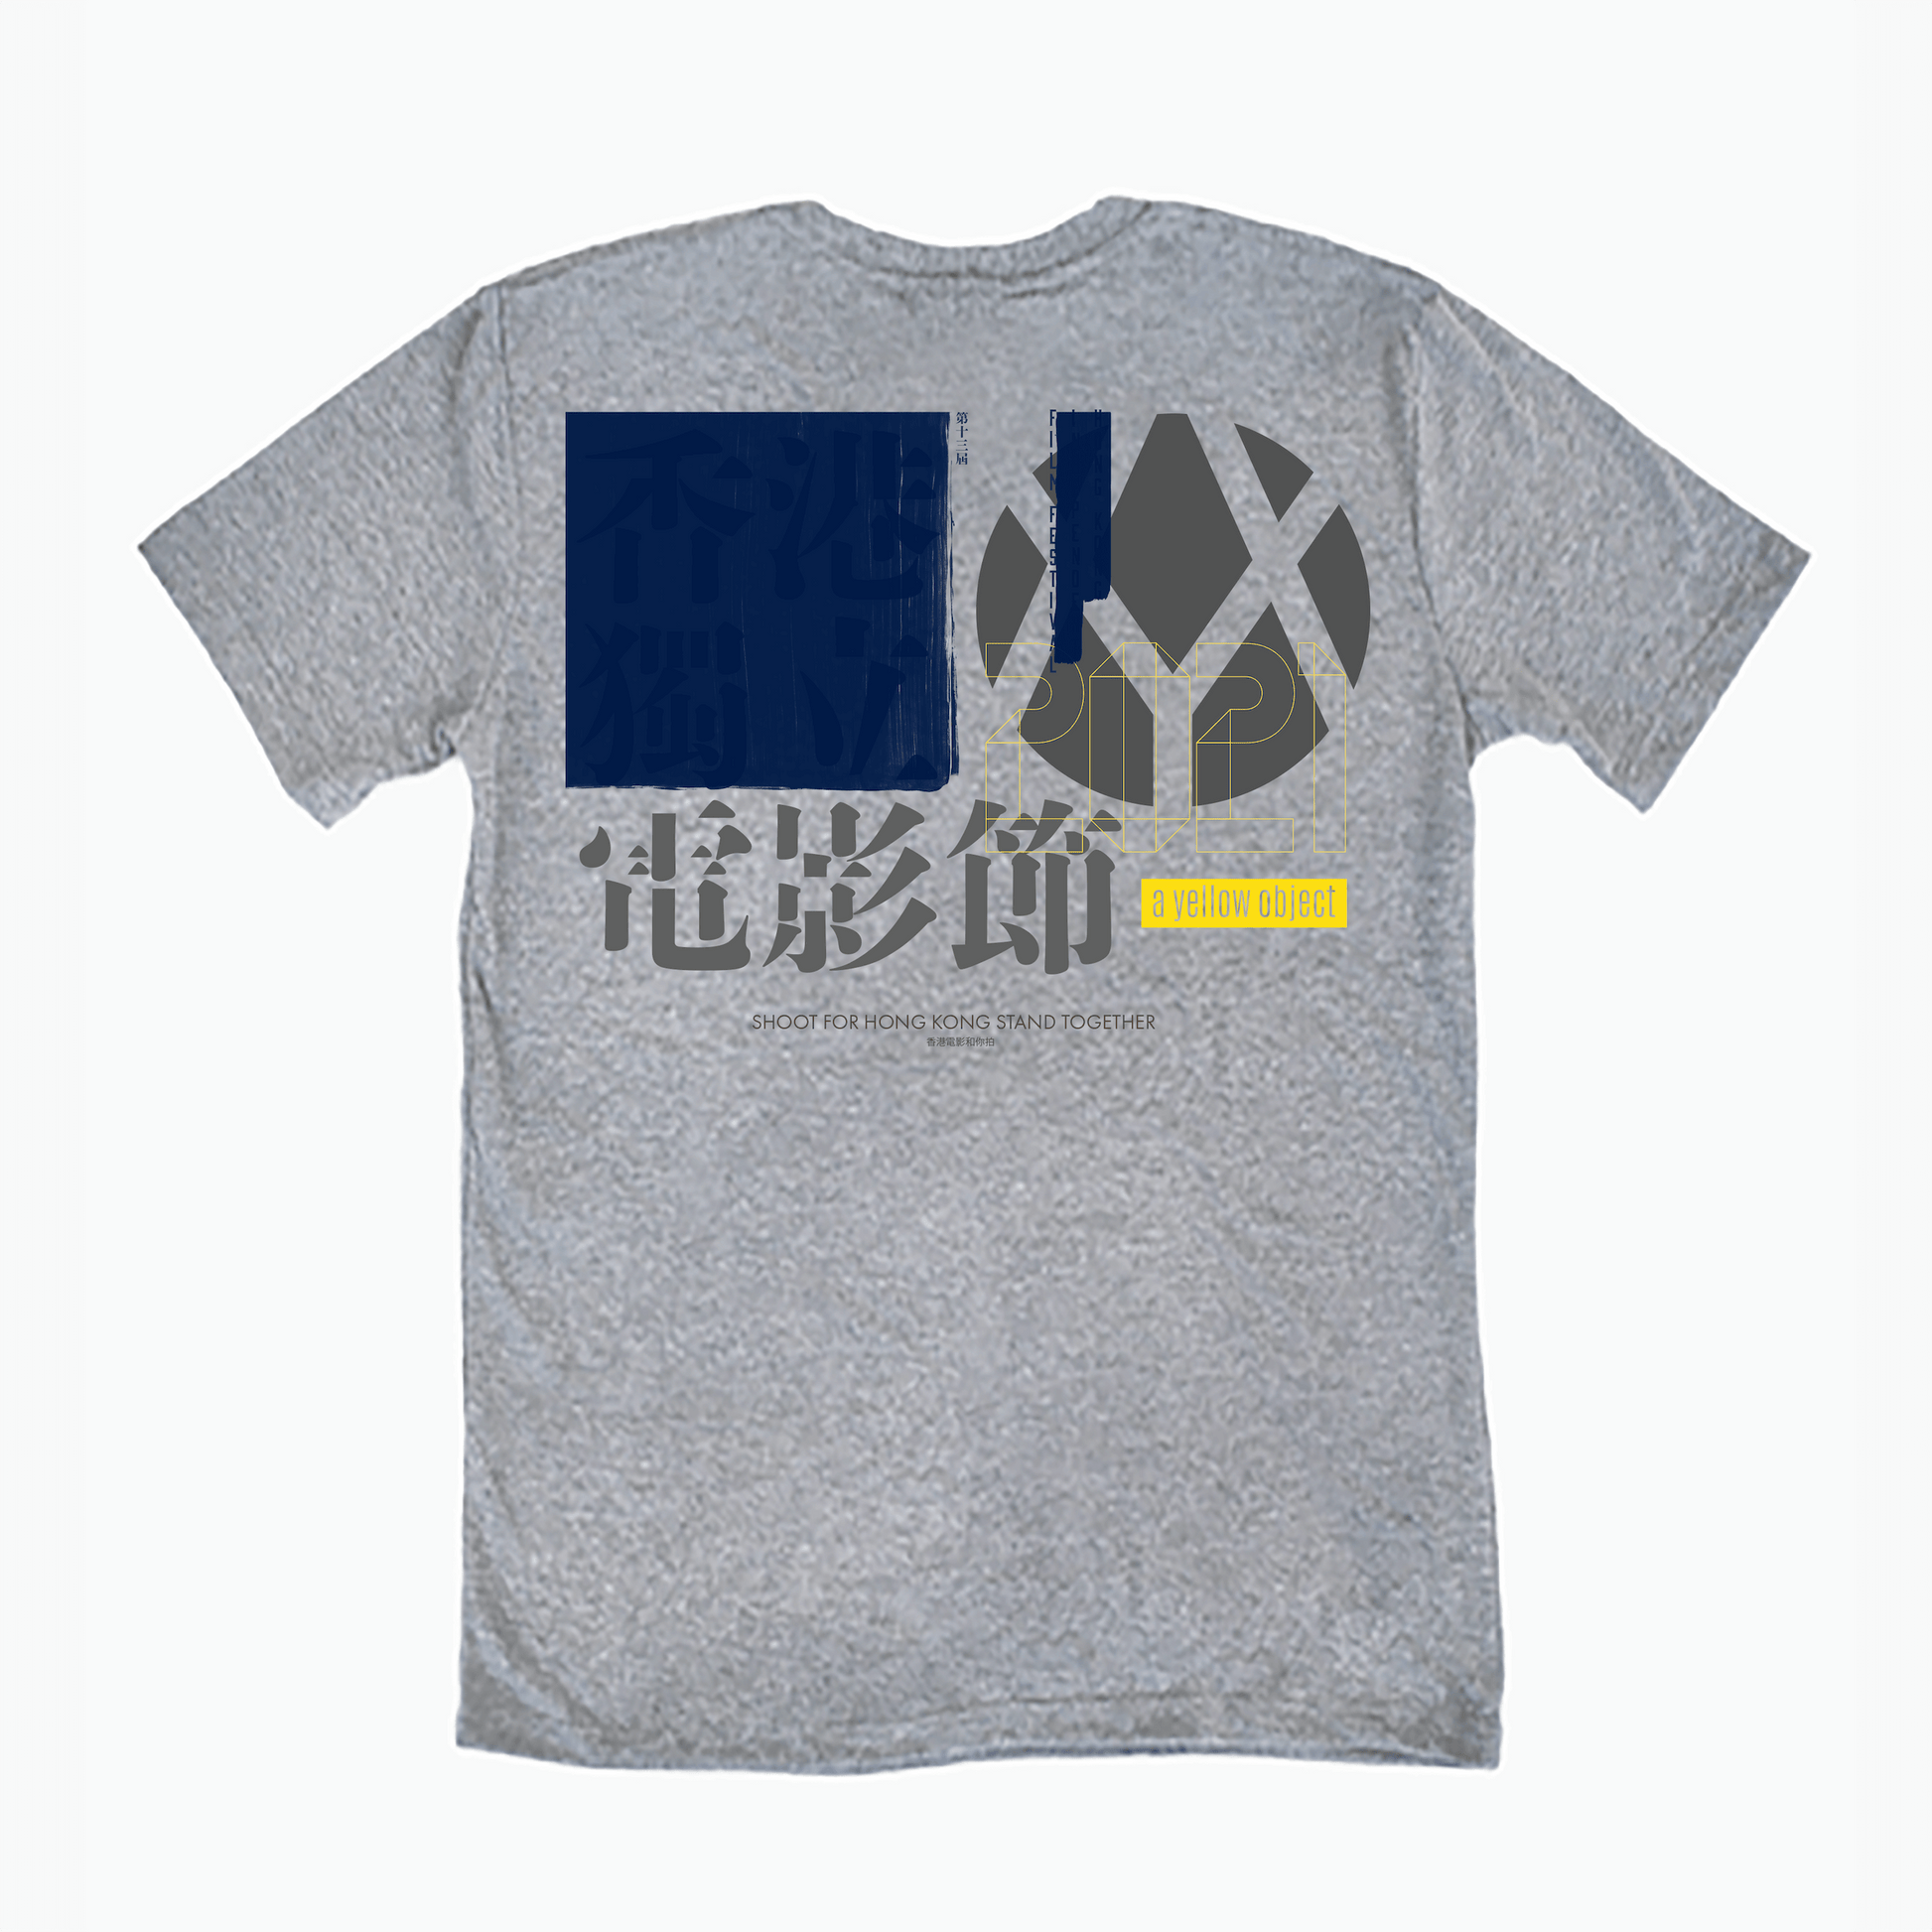 HKINDIEFF 13th T-Shirt (Gray) - A Yellow Object